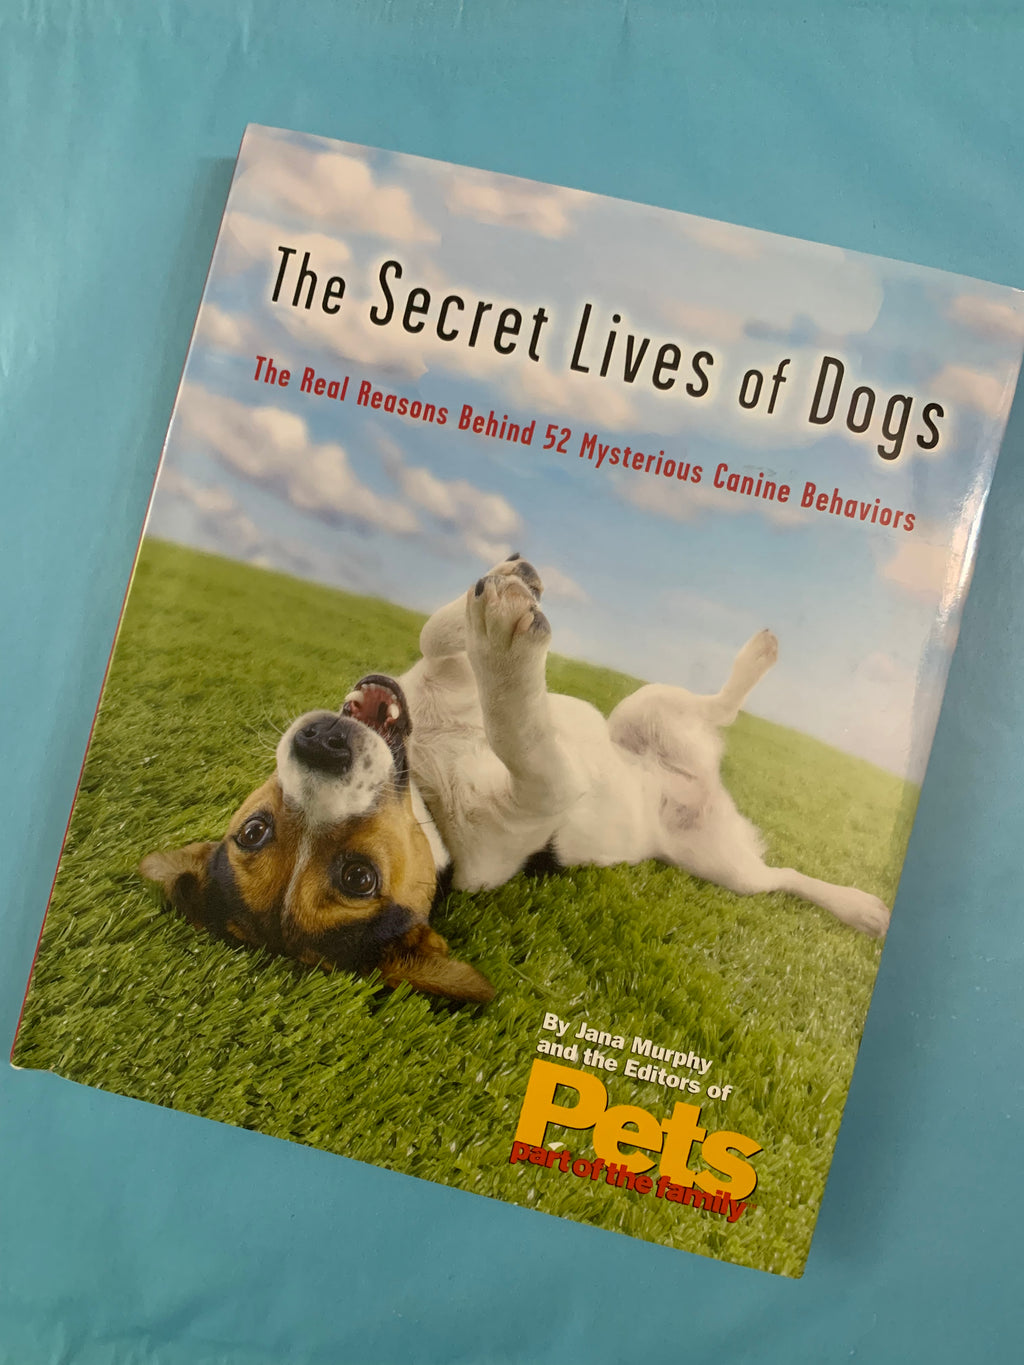 The Secret Lives of Dogs: The Real Reasons Behind 52 Mysterious Canine Behaviors- By Jane Murphy